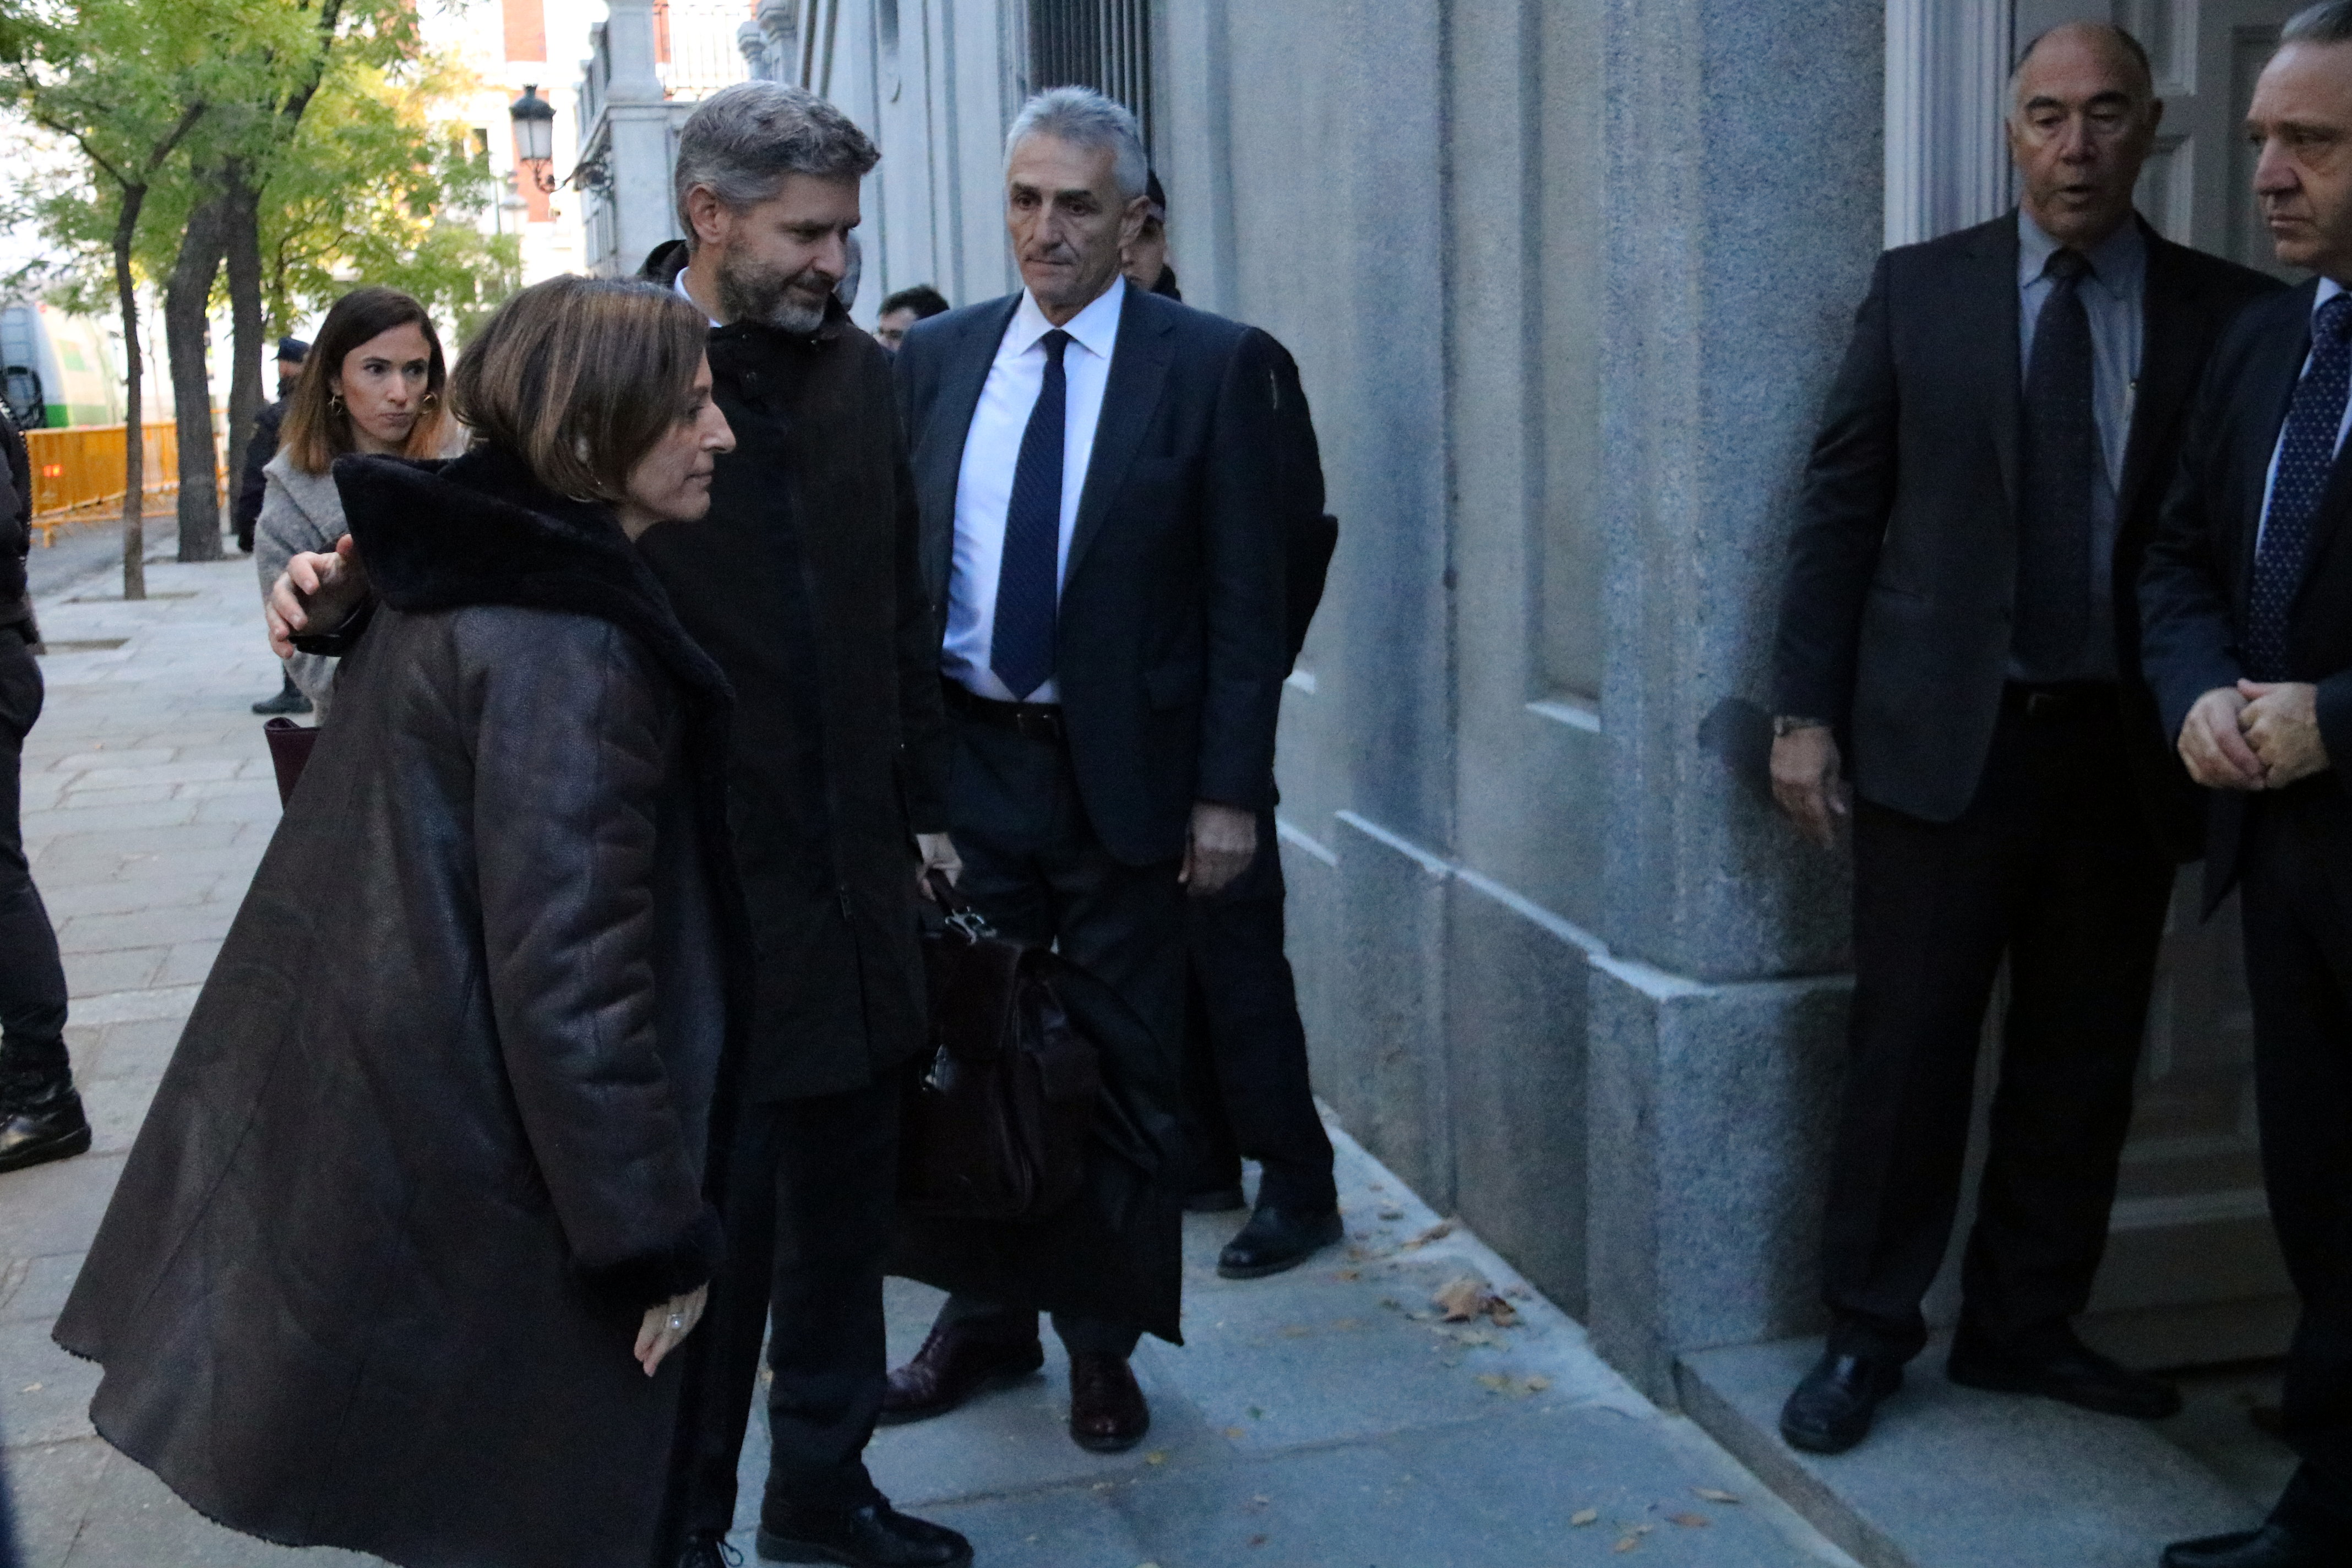 The Catalan Parliament president, Carme Forcadell, arriving at the Spanish National Court